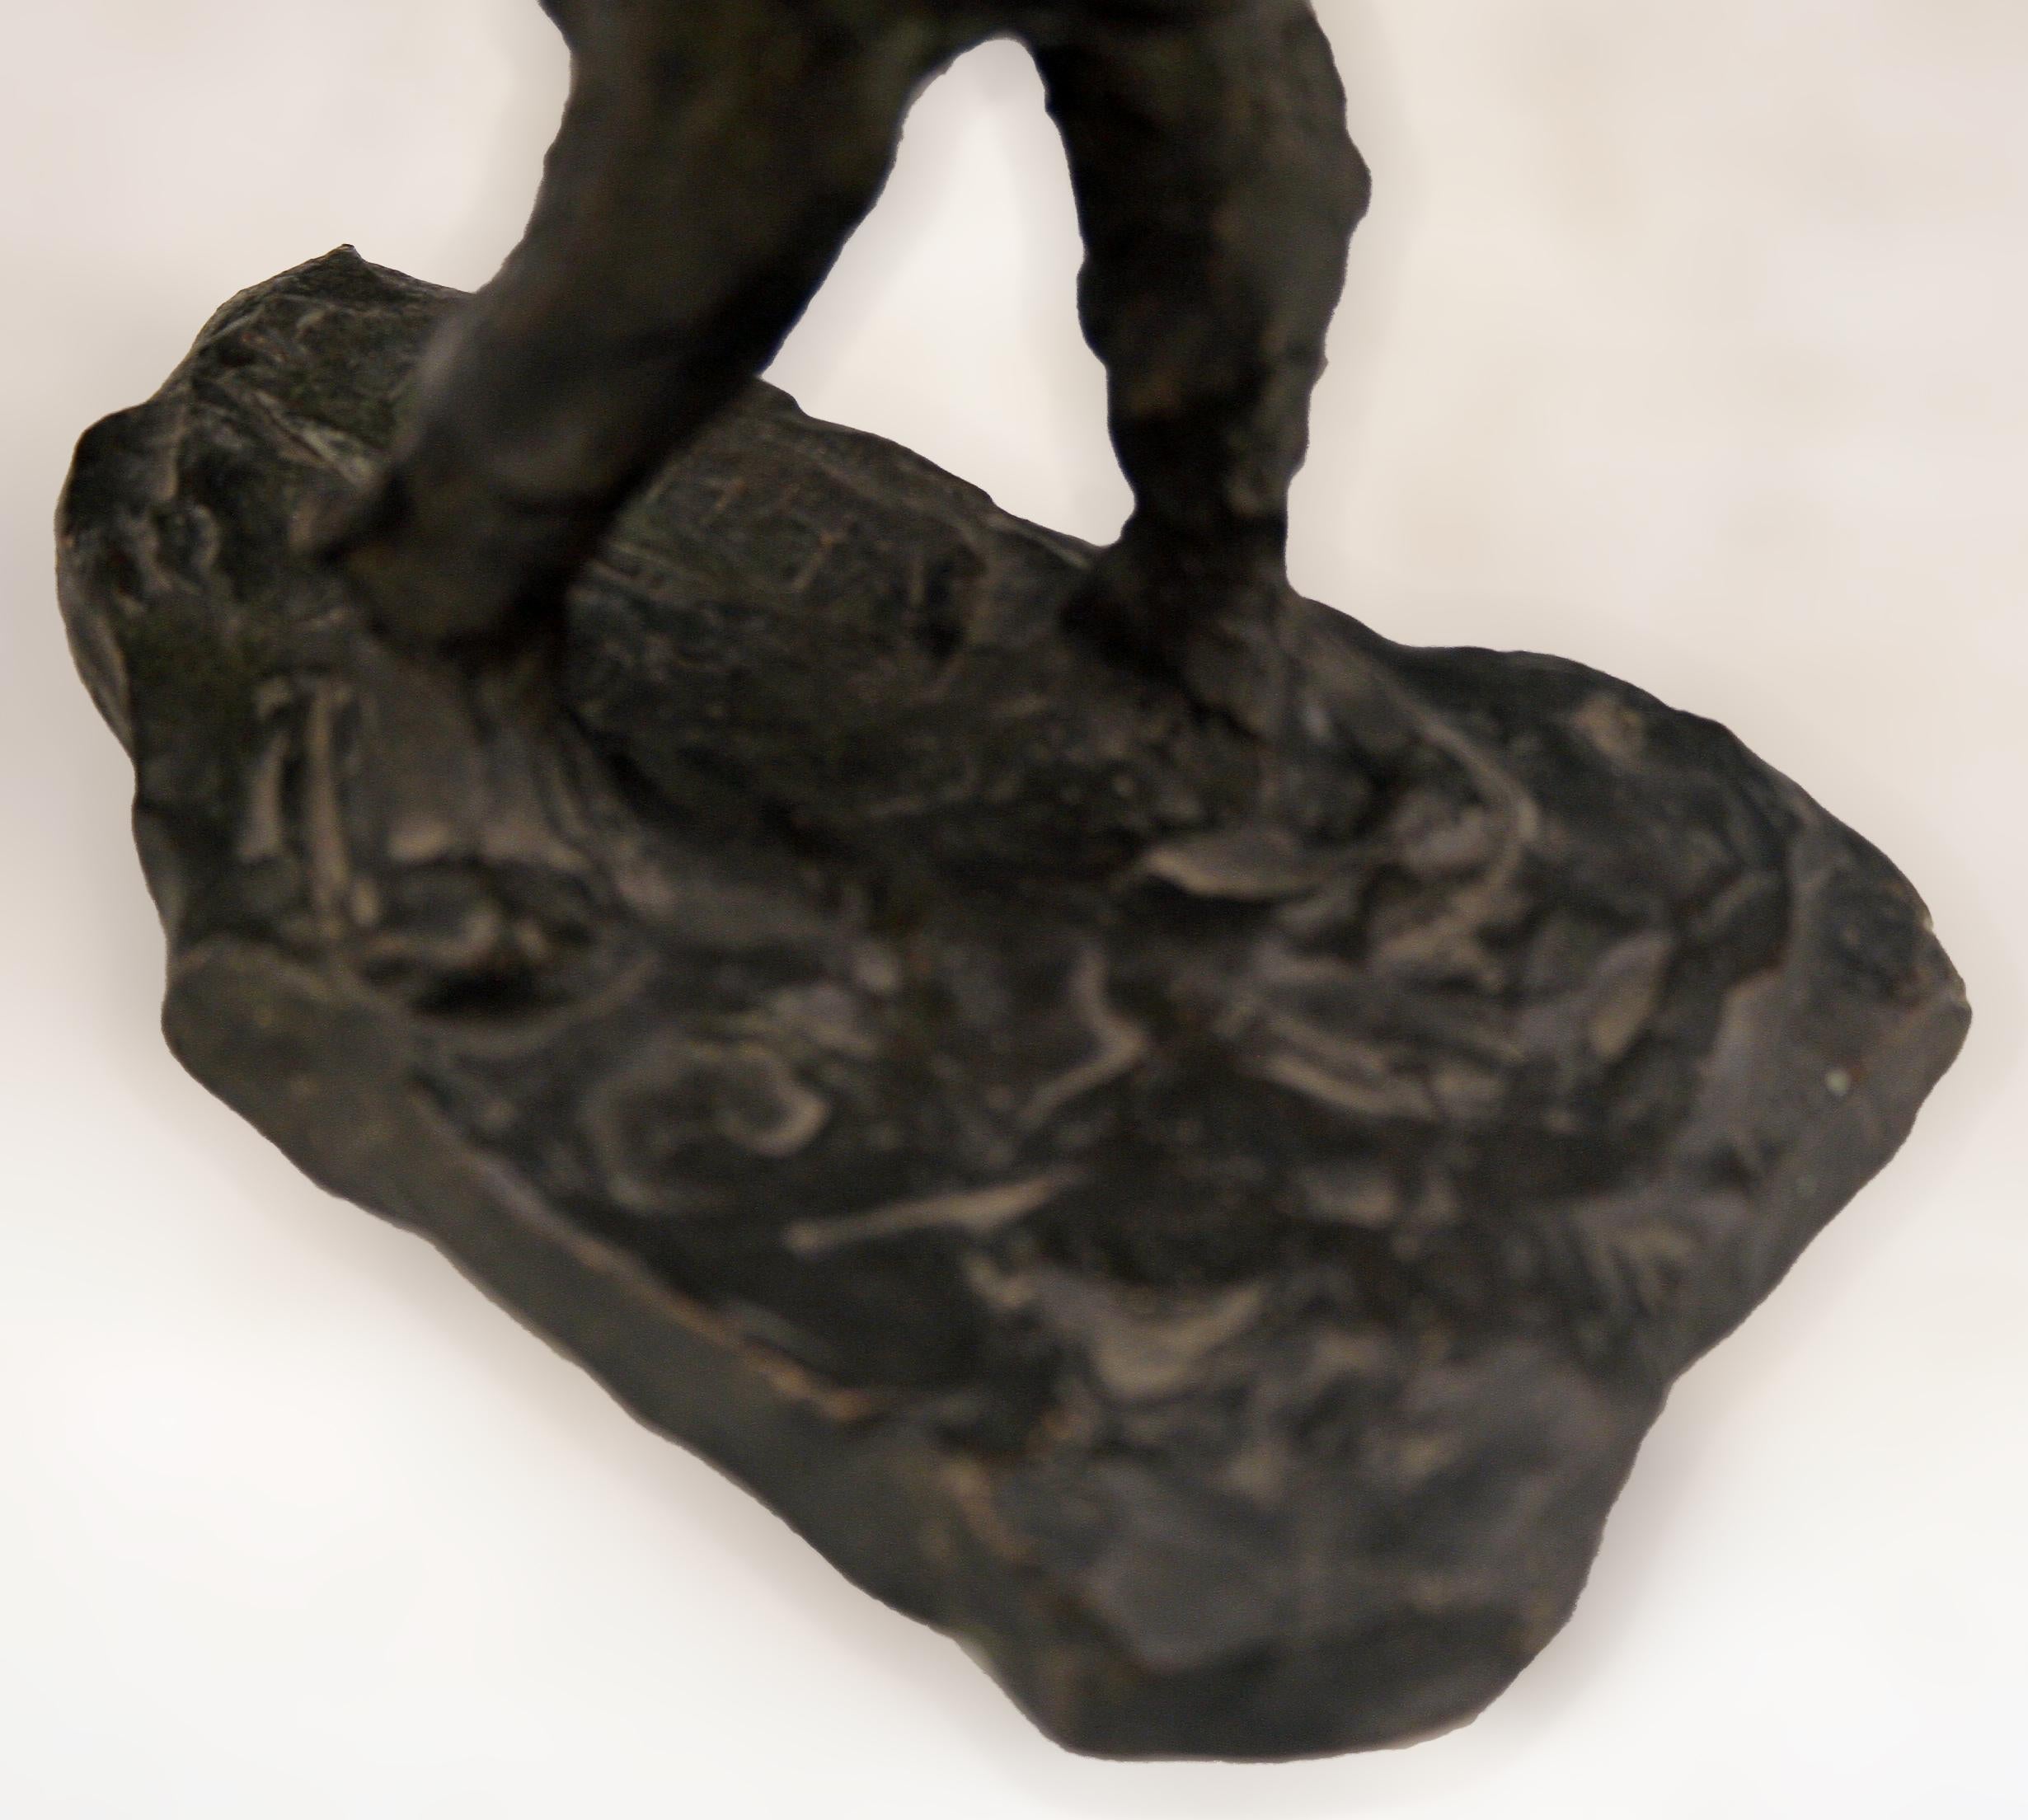 Expressionist Early 20th Century Bronze Sculpture of Carrying Man by Belgian Sculptor Demanet For Sale